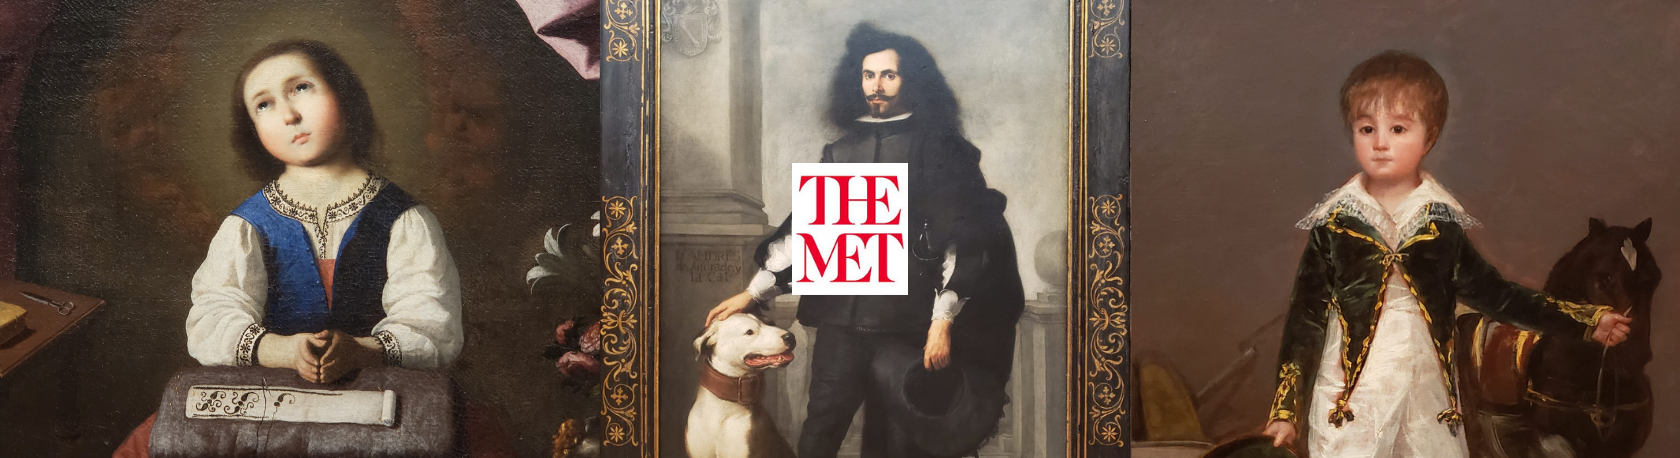 Spanish Guided Tour at The MET: How to Look at a Painting - Speak Spanish - Great Spanish Painters - Learn Spanish - Met Museum - NY Events - Easy Español